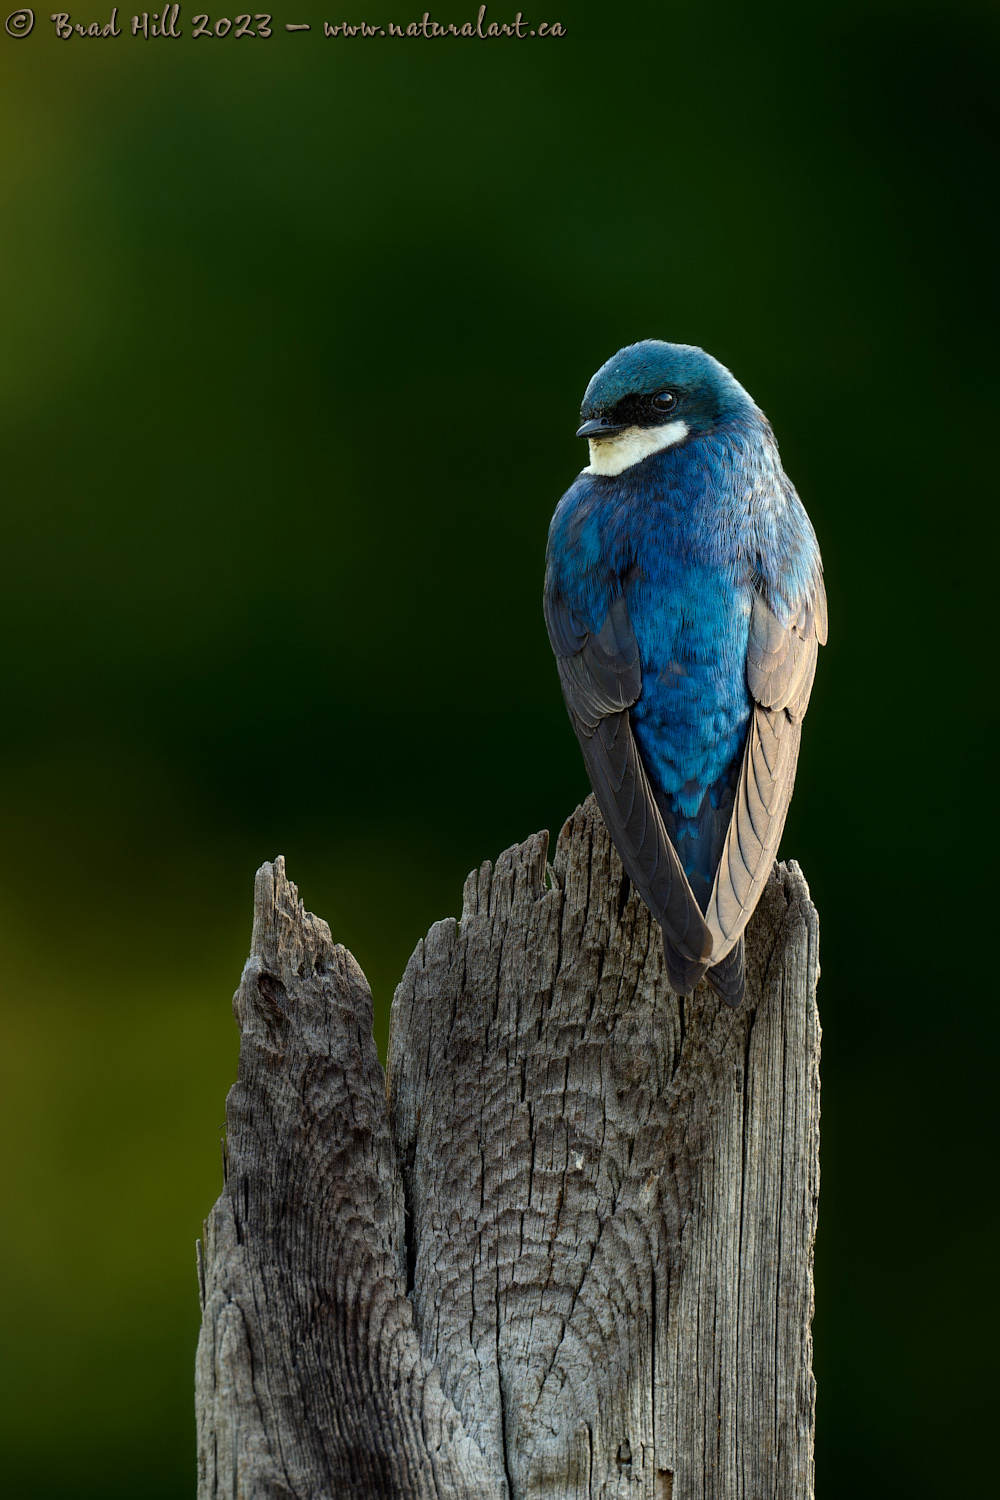 Tree Swallow - First Light of Day